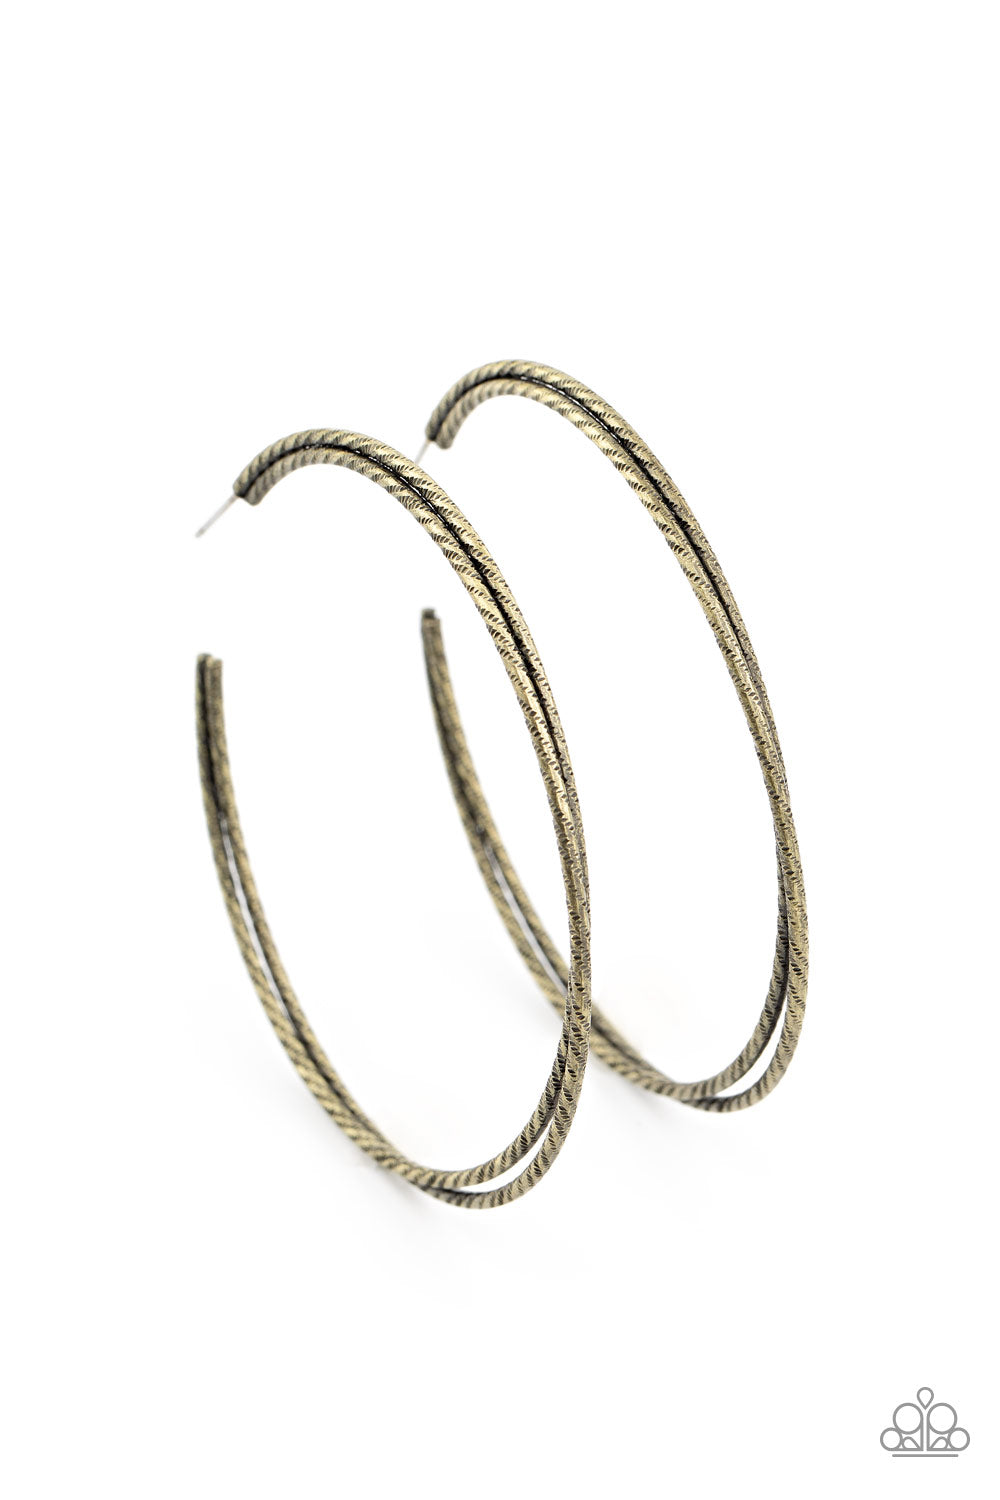 Curved Couture - Brass Hoop Earrings - Princess Glam Shop